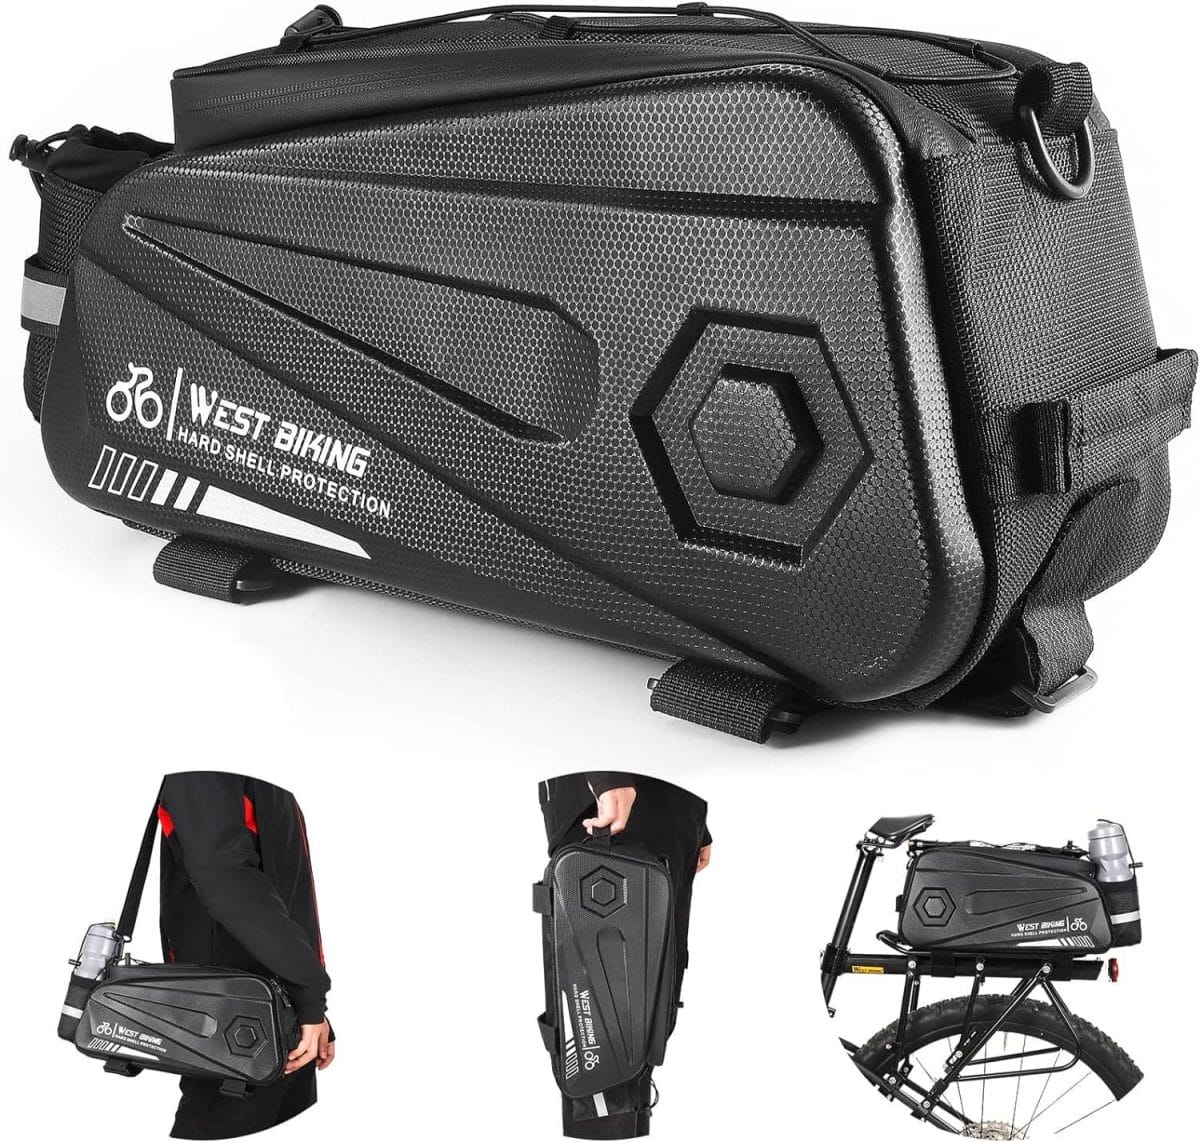 West Biking Bike Rear Seat Bag, Double Water Resistant, Zipper, Bicycle Trunk Pannier, 8.6L Capacity Waterproof Backseat Carrier Cargo Pouch with Strap  Rain Cover For Cycling